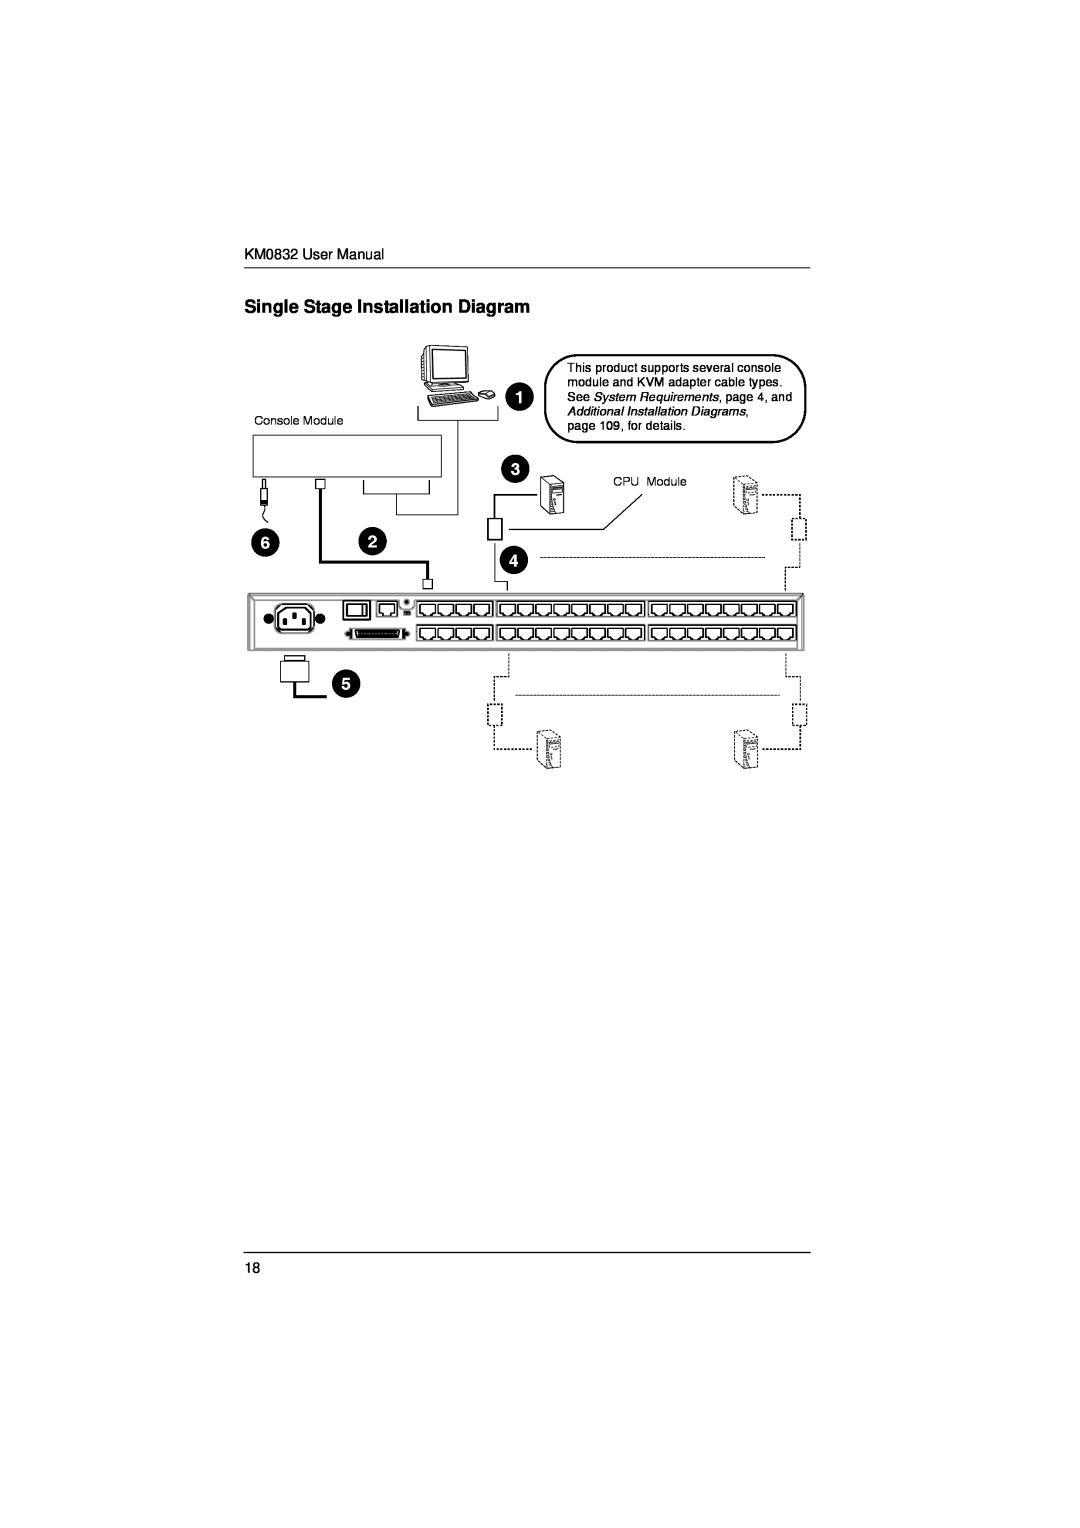 ATEN Technology KM0832 user manual Single Stage Installation Diagram, Console Module, page 109, for details, CPU Module 